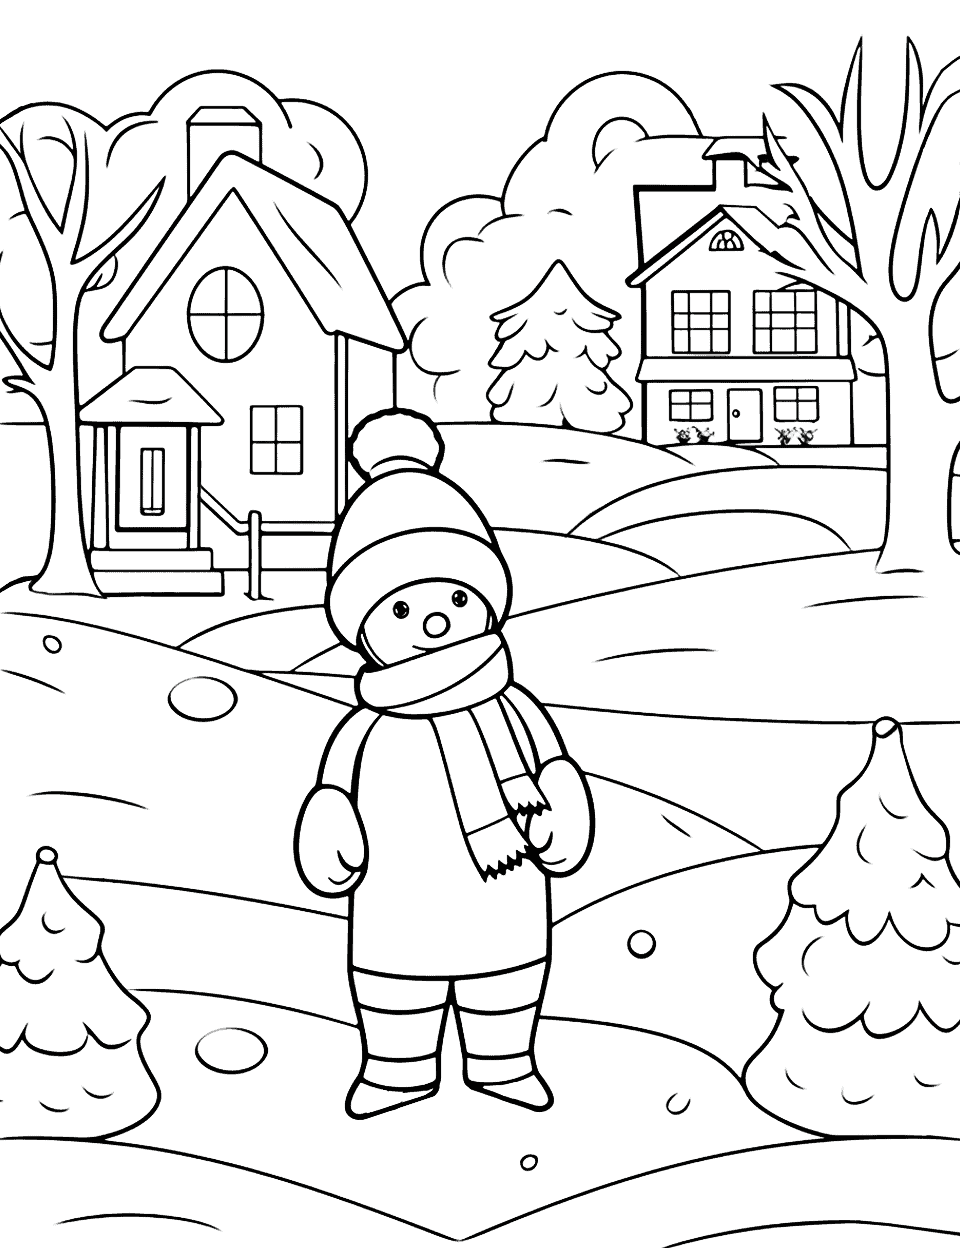 Pre K Snowy Day Winter Coloring Page - A simple scene of a snowy day, with big, easy-to-color sections.